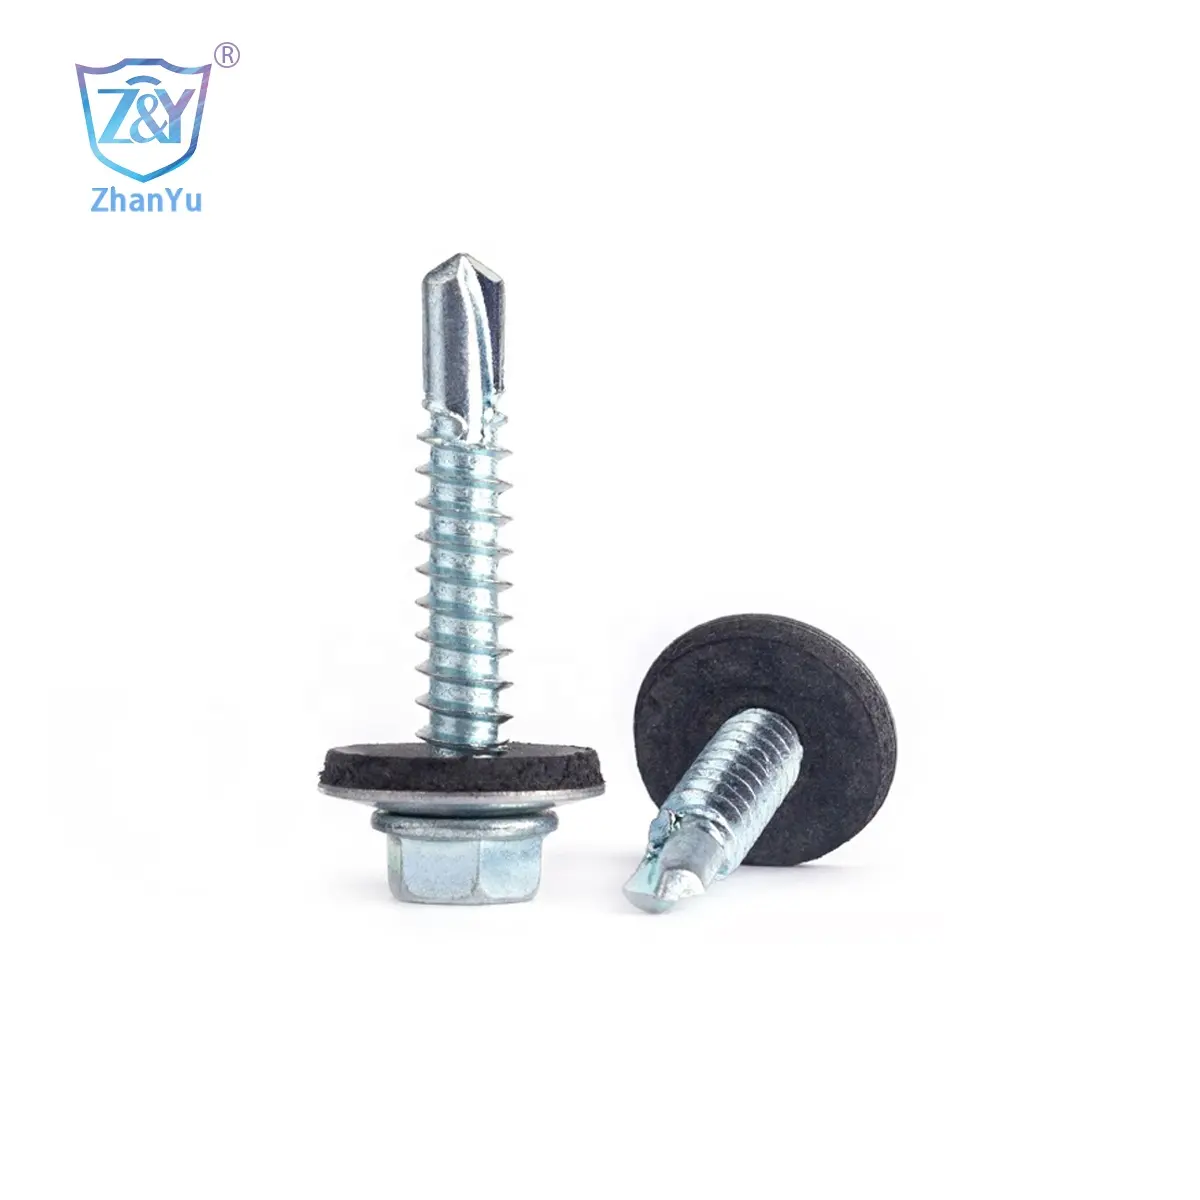 DIN7504 China wholesale galvanised metal Truss head bolts tek wood self drilling screws with washer roofing nails